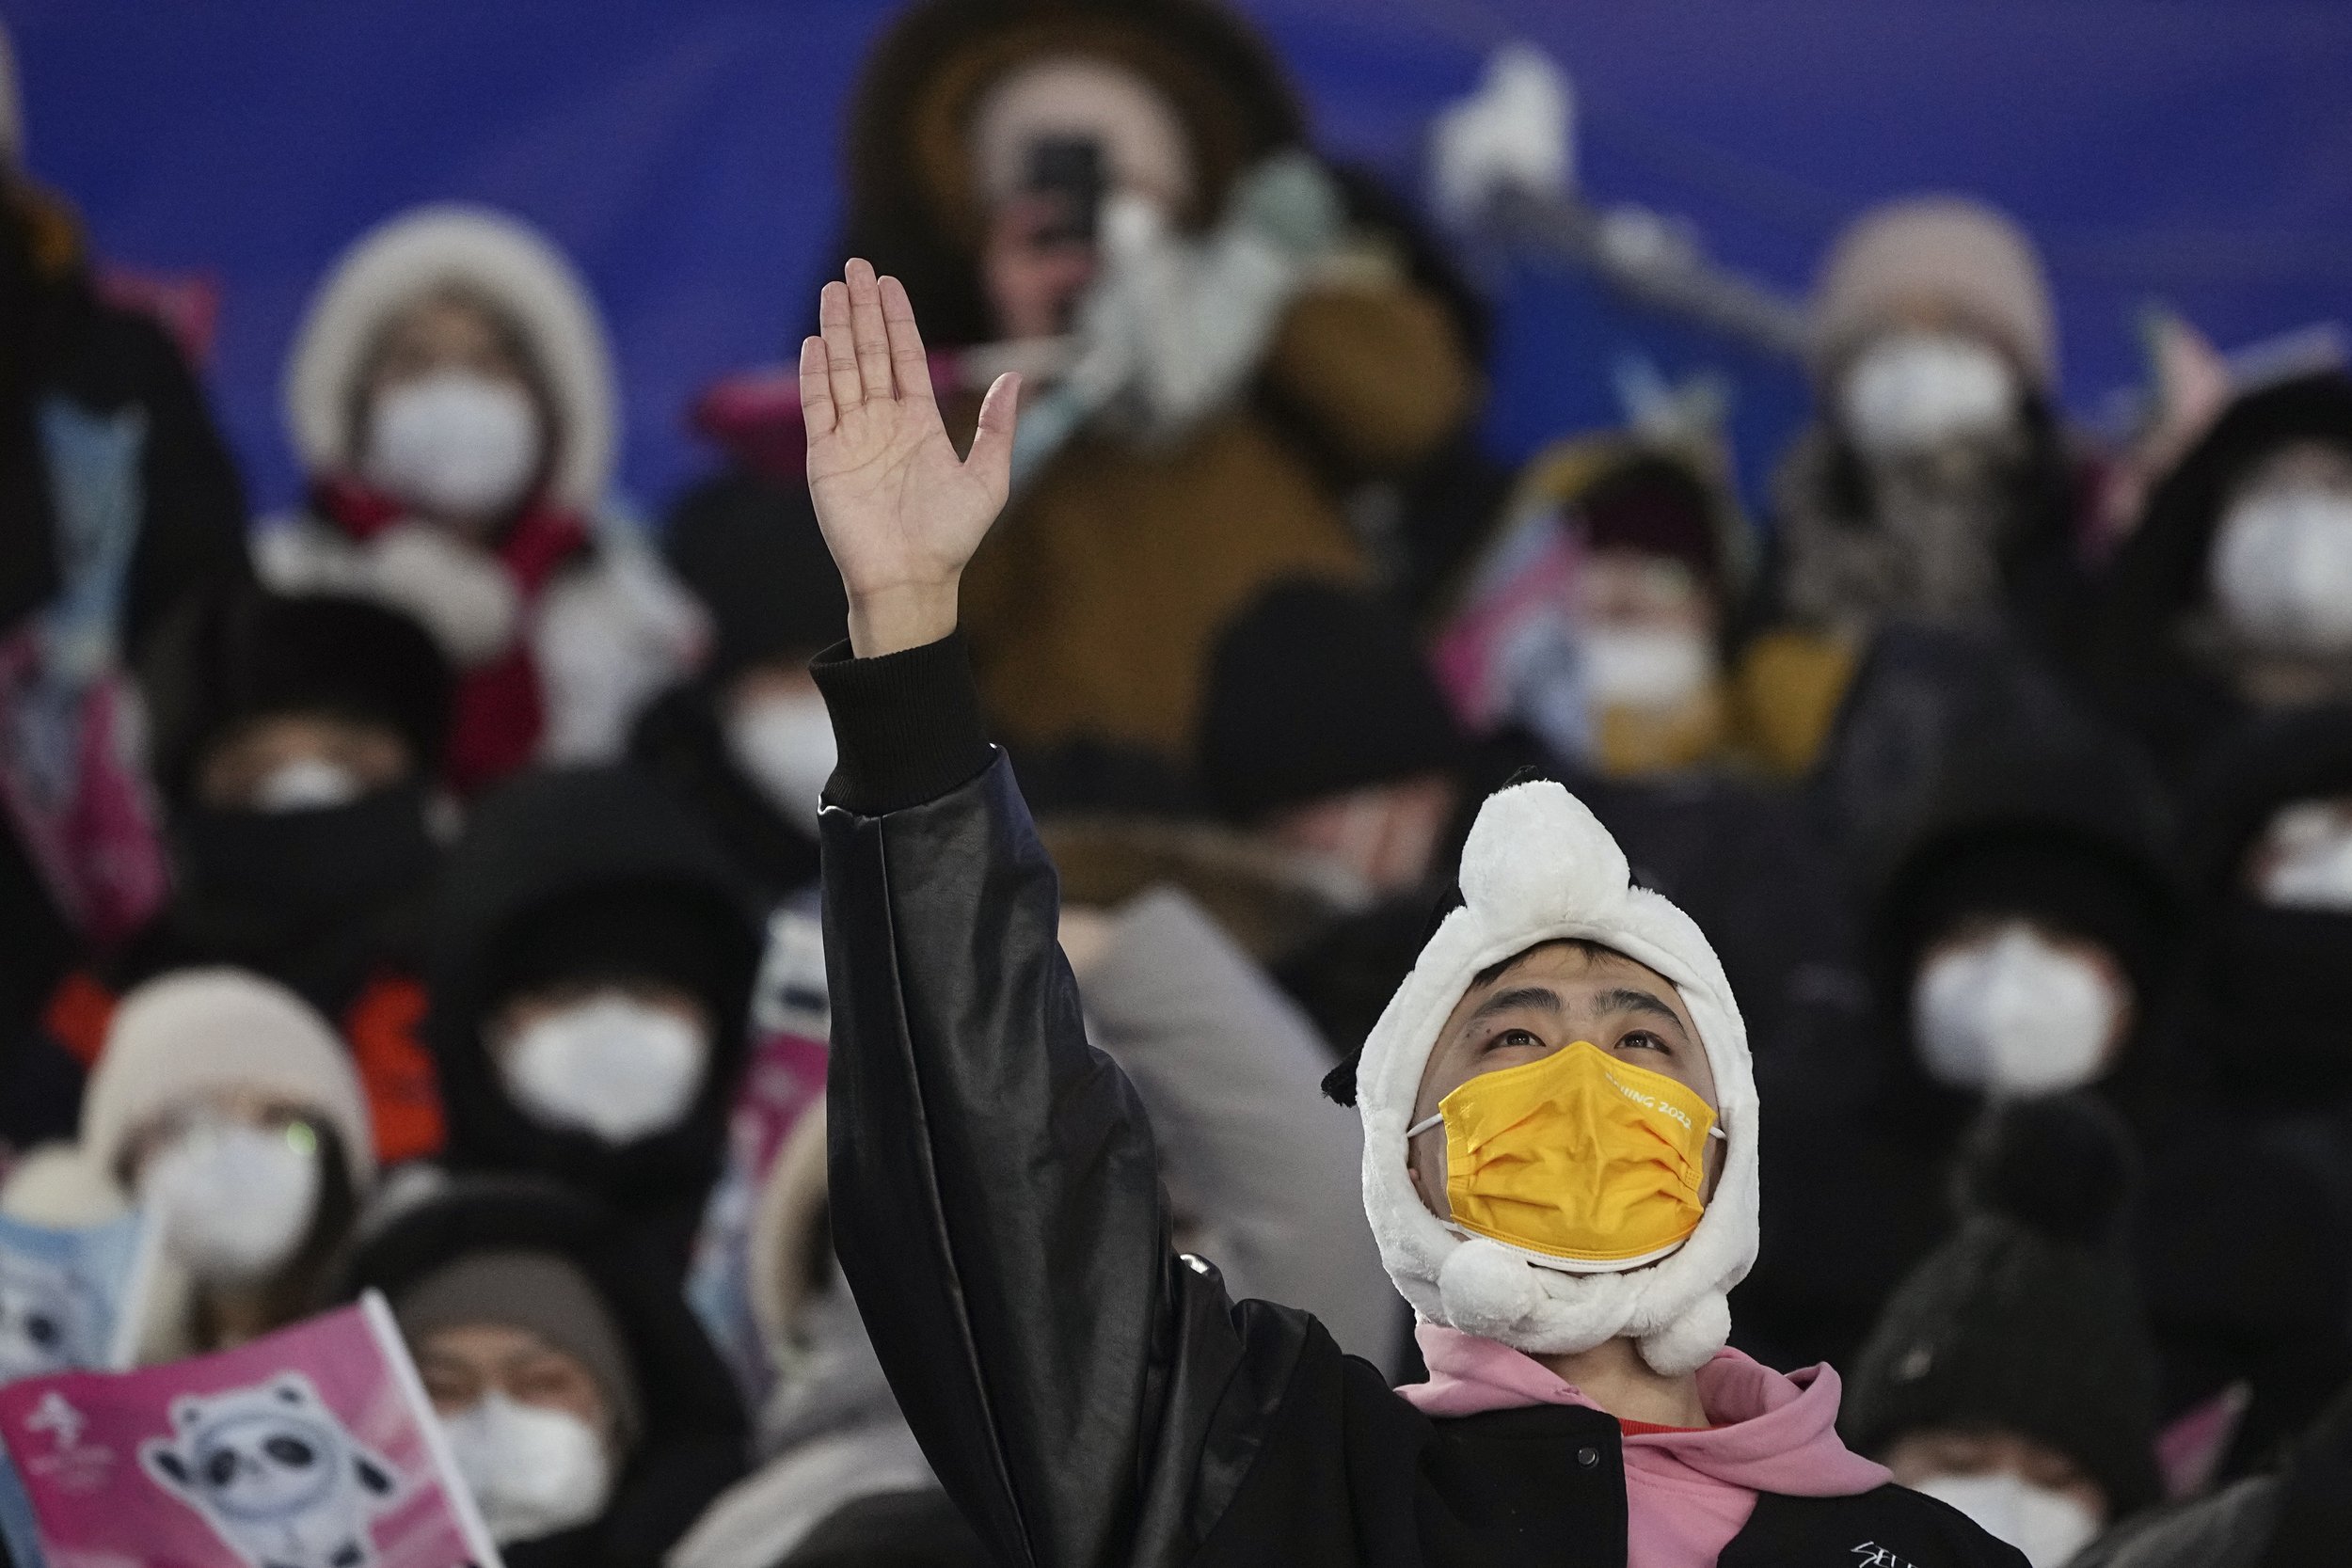  Spectators watch during the men's moguls qualifying at Genting Snow Park at the 2022 Winter Olympics, Saturday, Feb. 5, 2022, in Zhangjiakou, China. (AP Photo/Gregory Bull) 